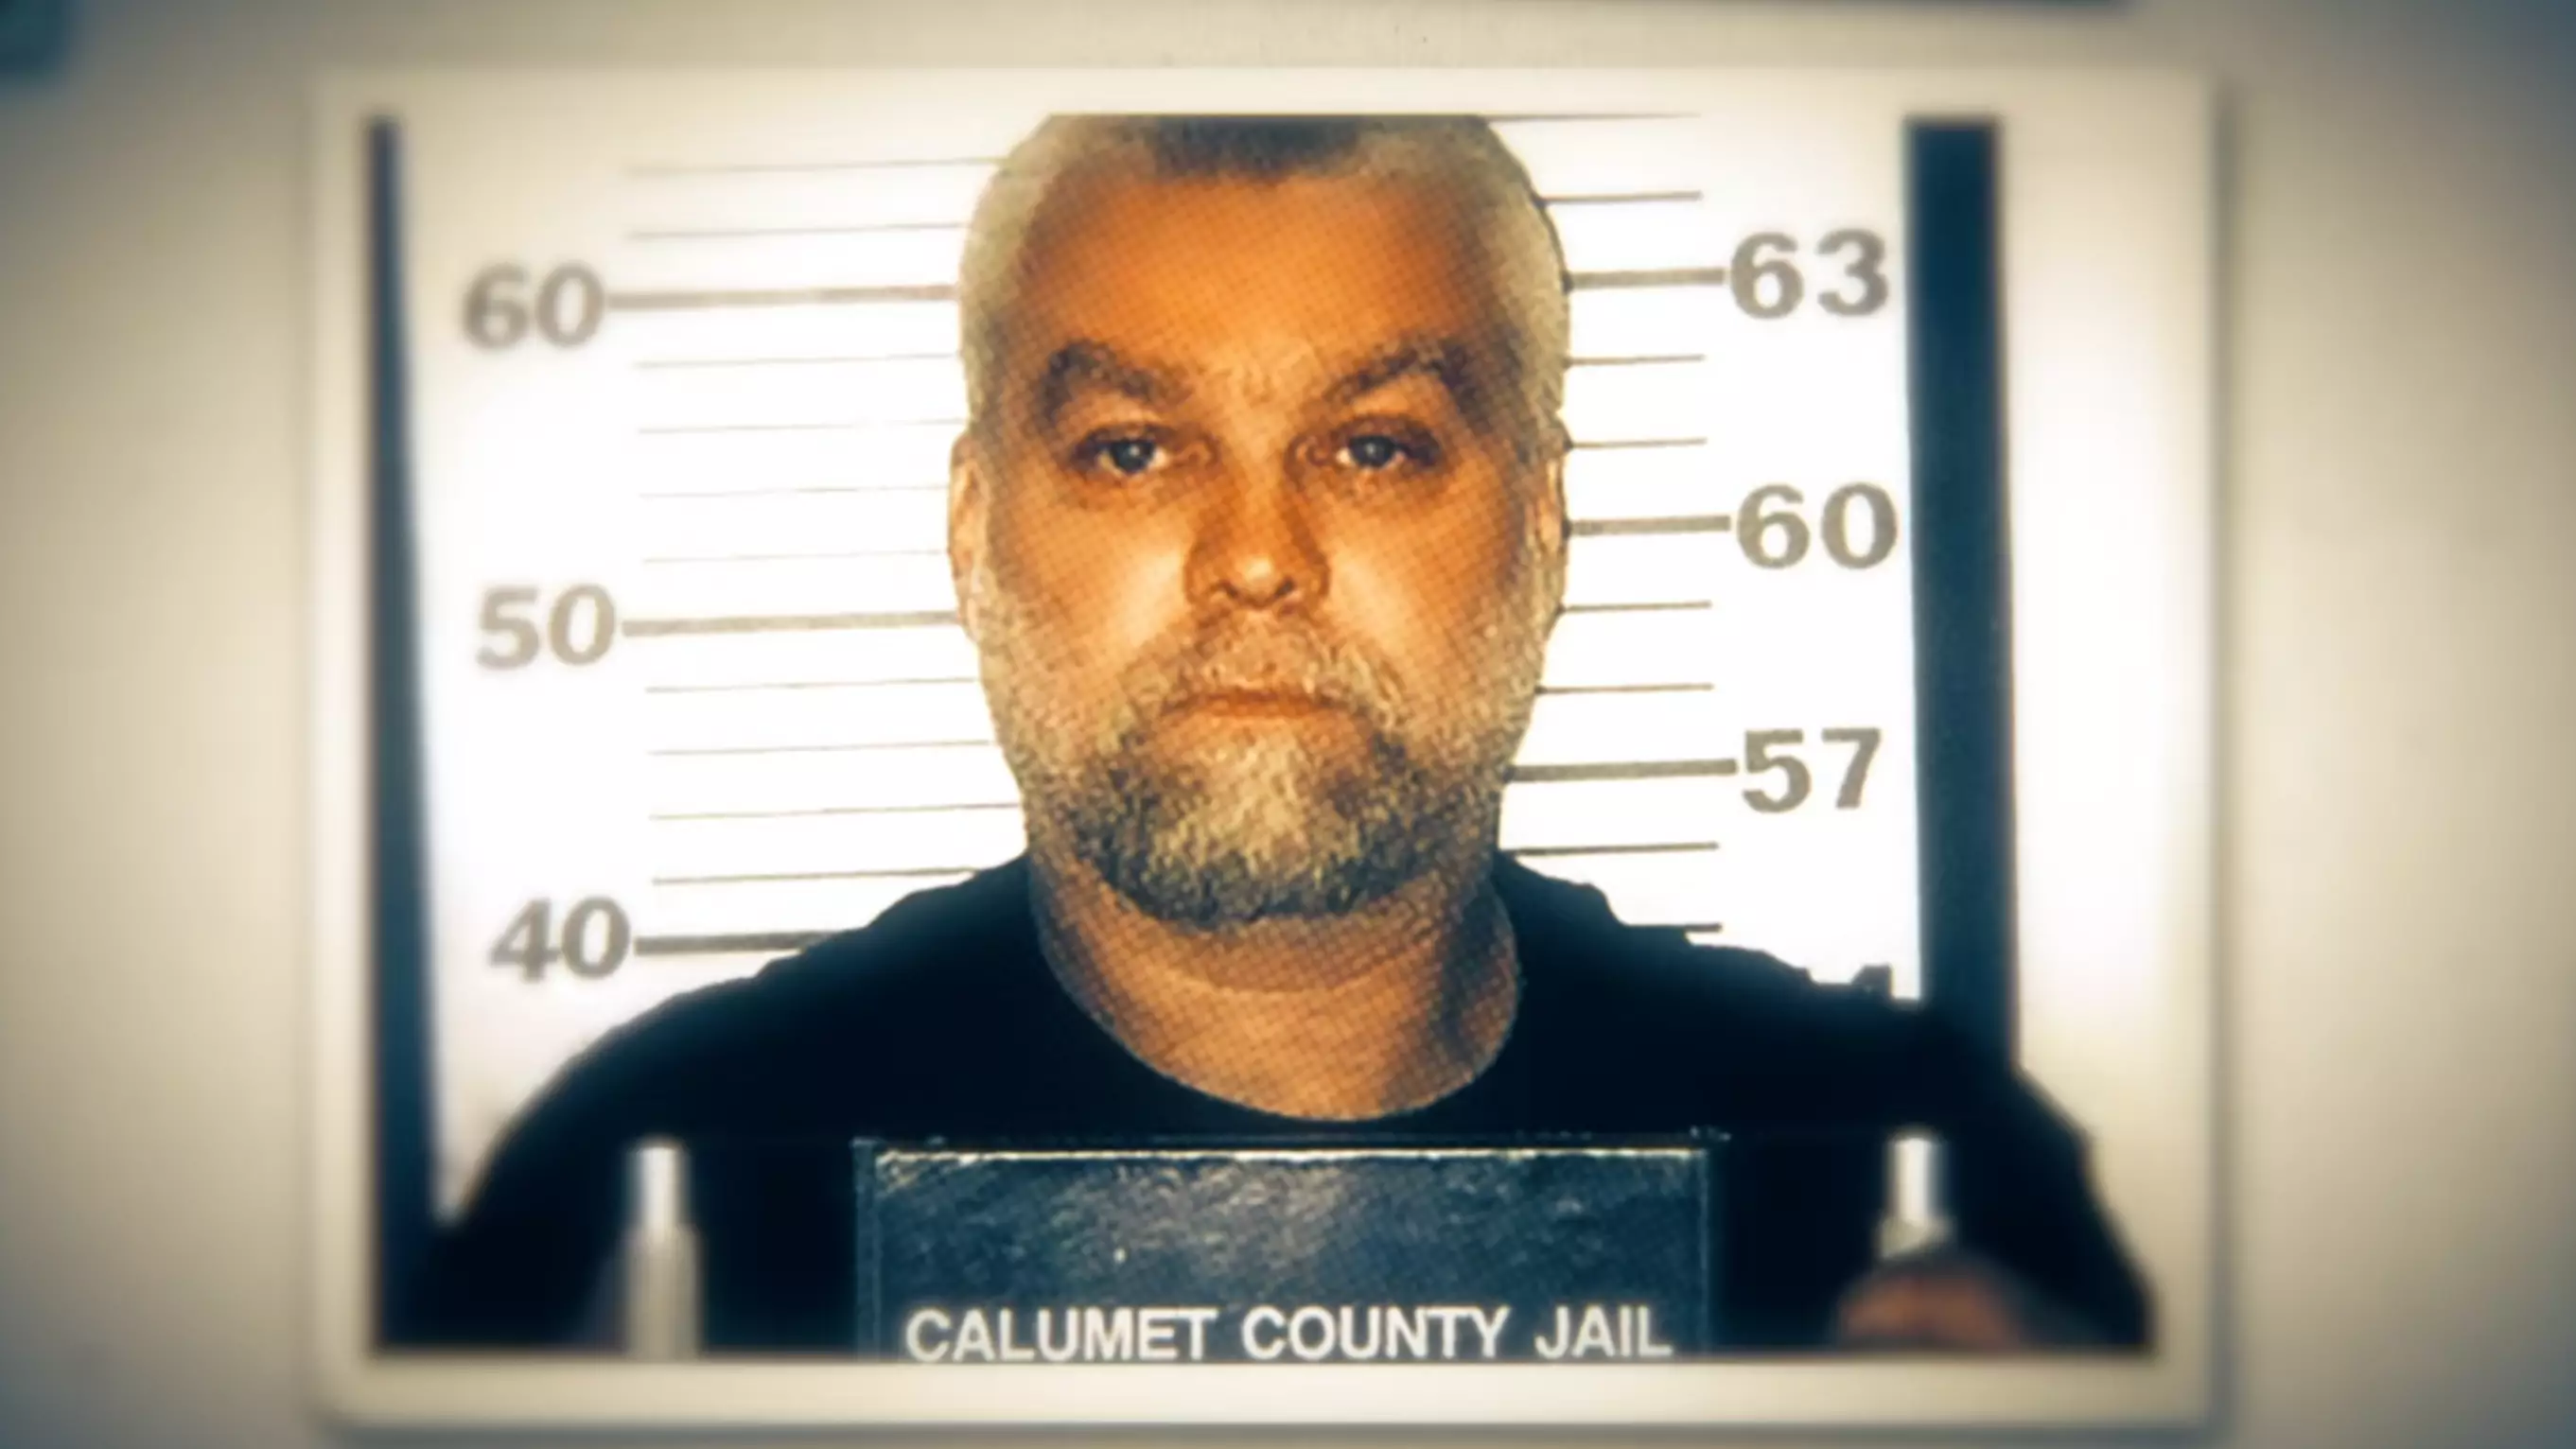 Steven Avery is the subject of the hit Netflix documentary series 'Making A Murderer' (